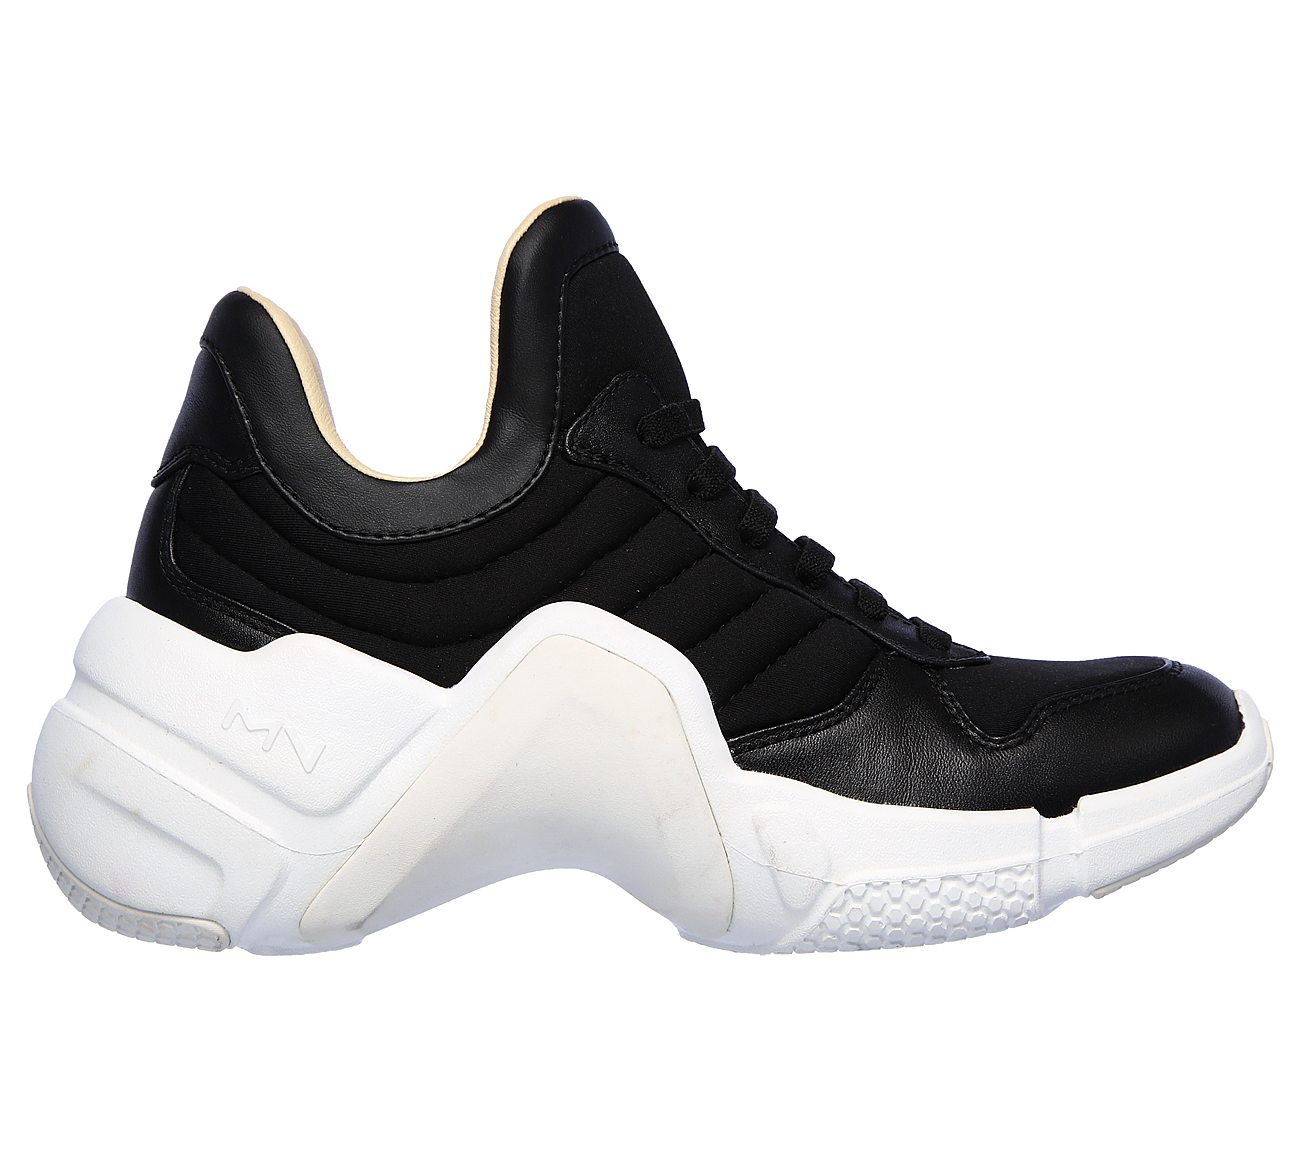 NEO BLOCK - AMPED, BLACK/WHITE Footwear Right View